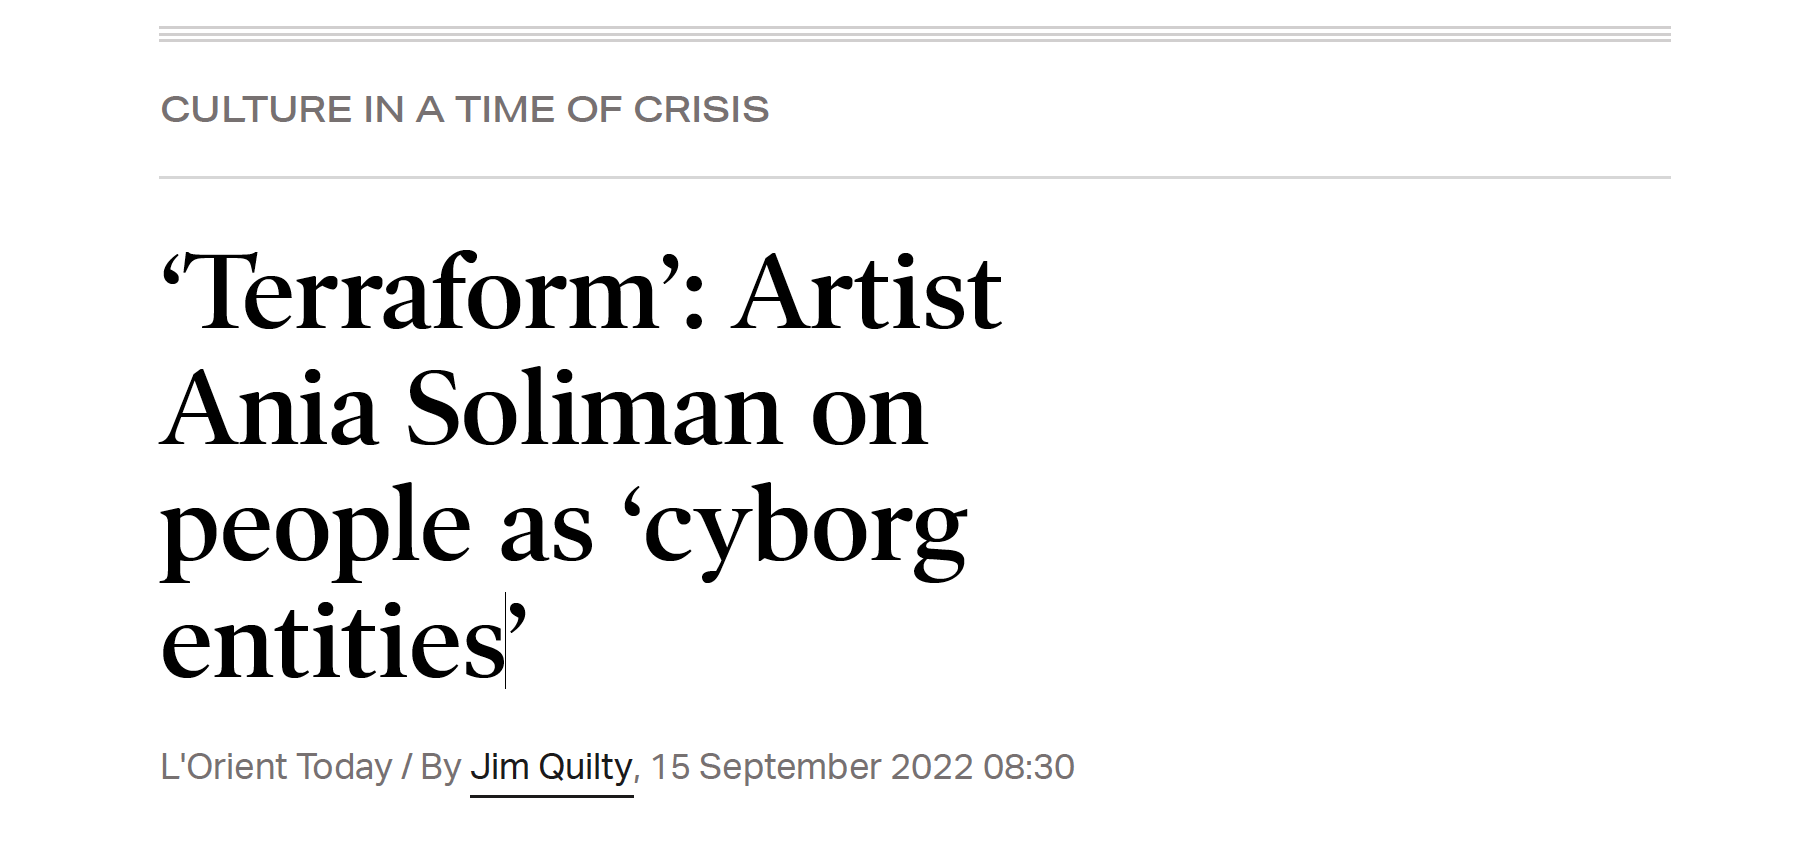 Ania Soliman « ‘Terraform’- Artist Ania Soliman on people as ‘cyborg entities’», — Jim Quilty | via L'Orient Today, September 15, 2022